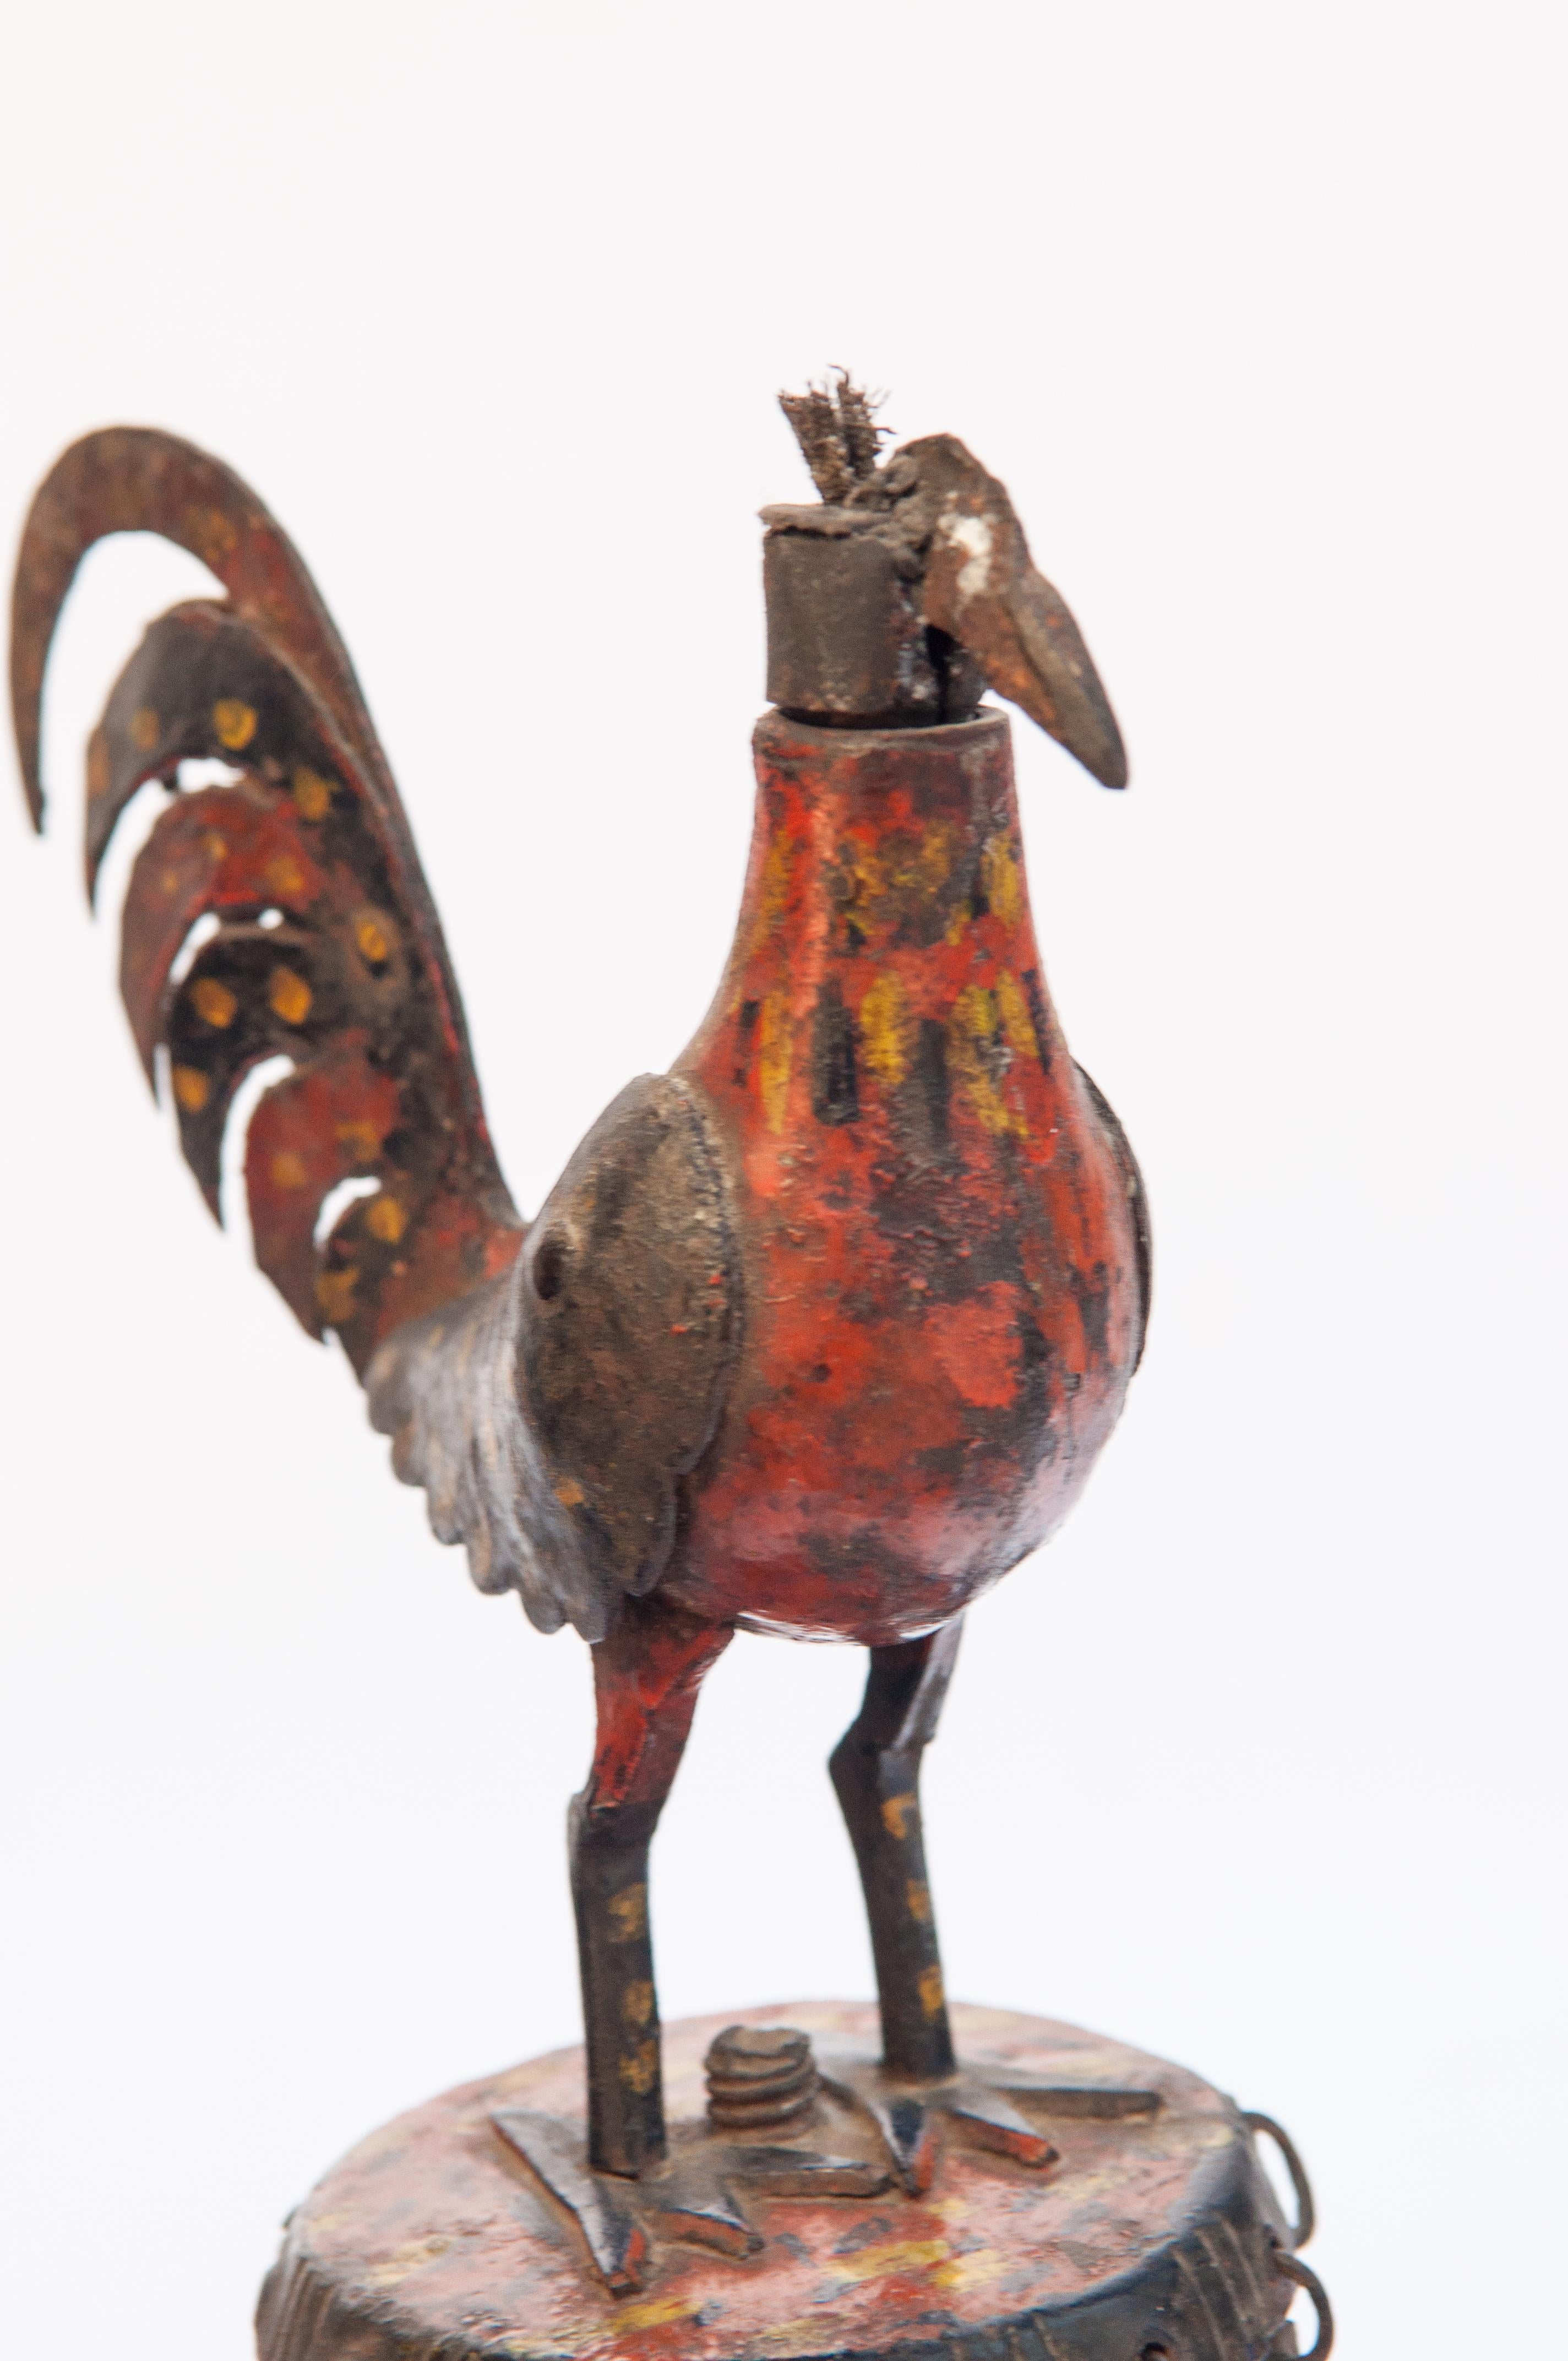 Hand-Crafted Vintage Metal Oil Lamp Rooster Motif Original Color Rural Nepal Mid-20th Century